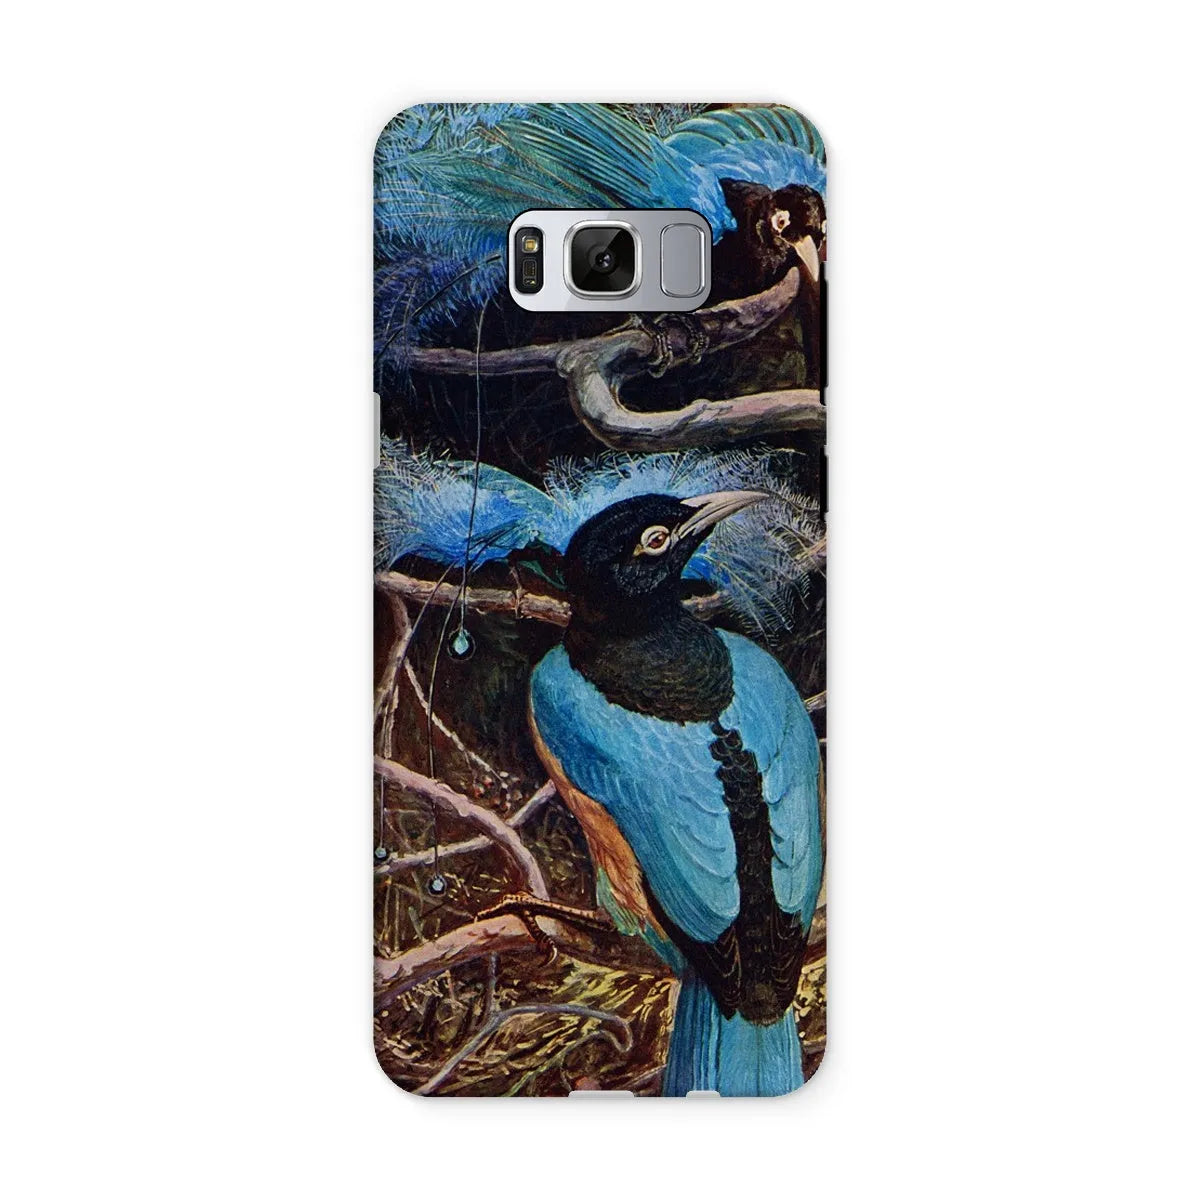 Blue Bird Of Paradise Aesthetic Phone Case - Henry Johnston - Samsung Galaxy S8 / Matte - Mobile Phone Cases